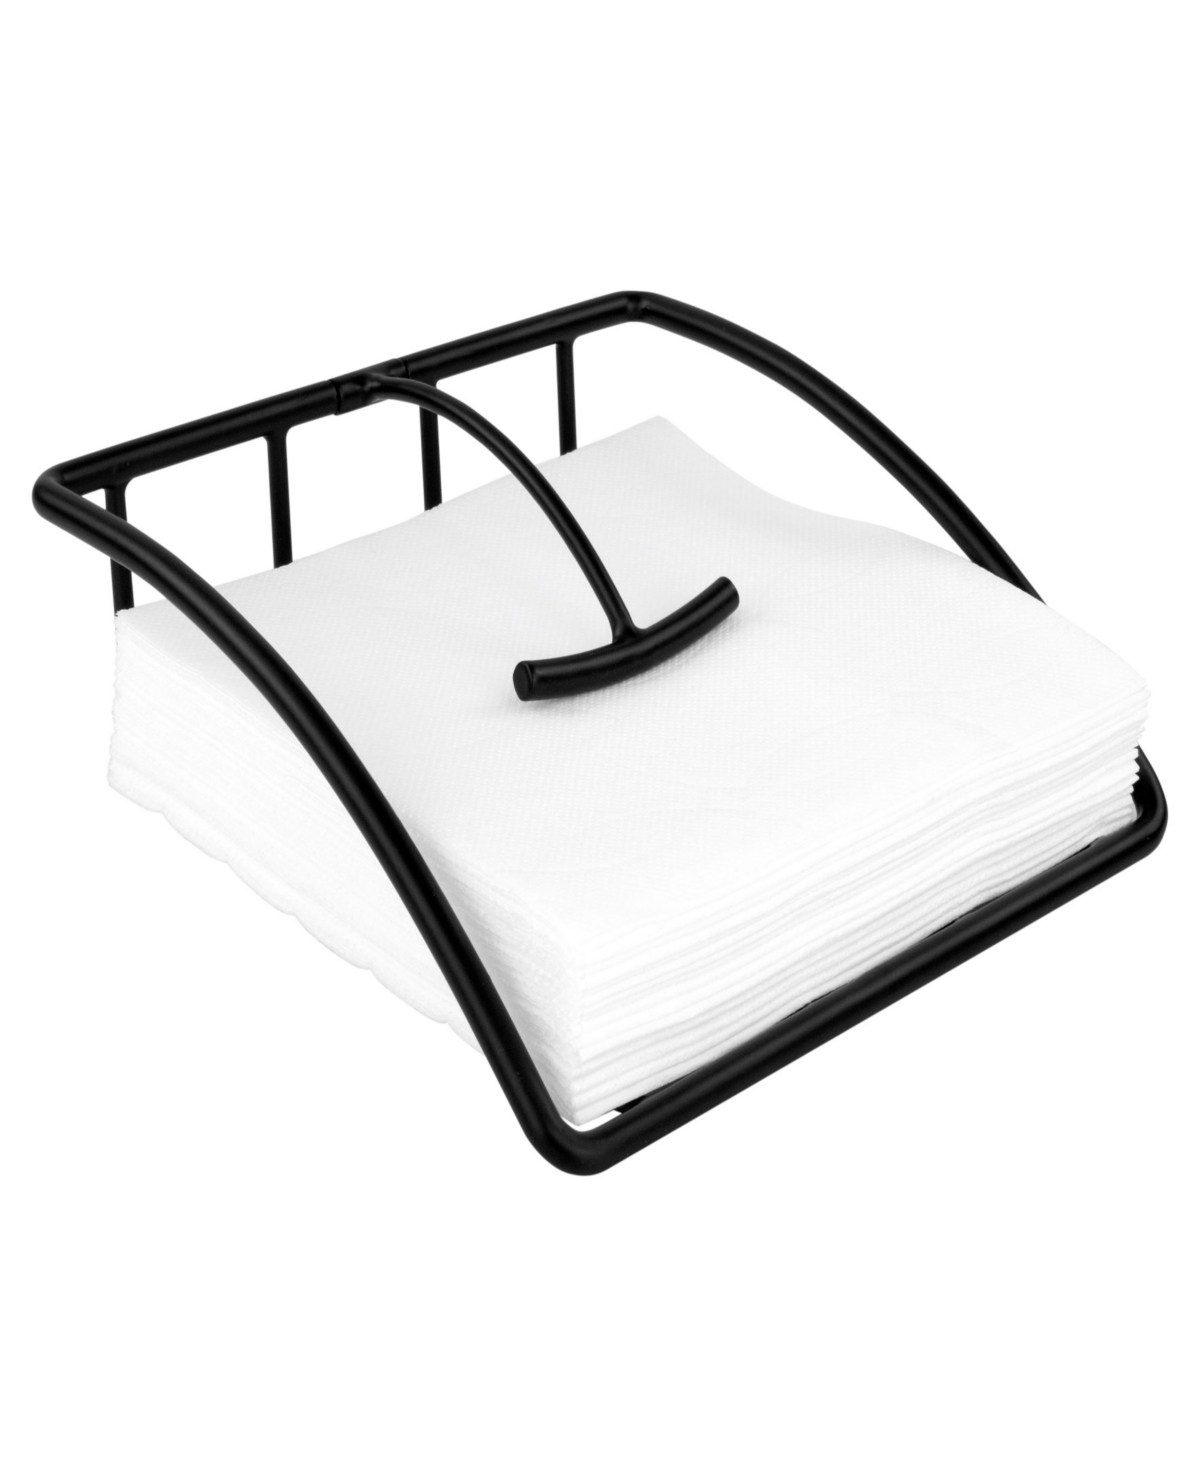 Shop Spectrum Euro Weighted Napkin Holder For Storage And Dispensing In Black